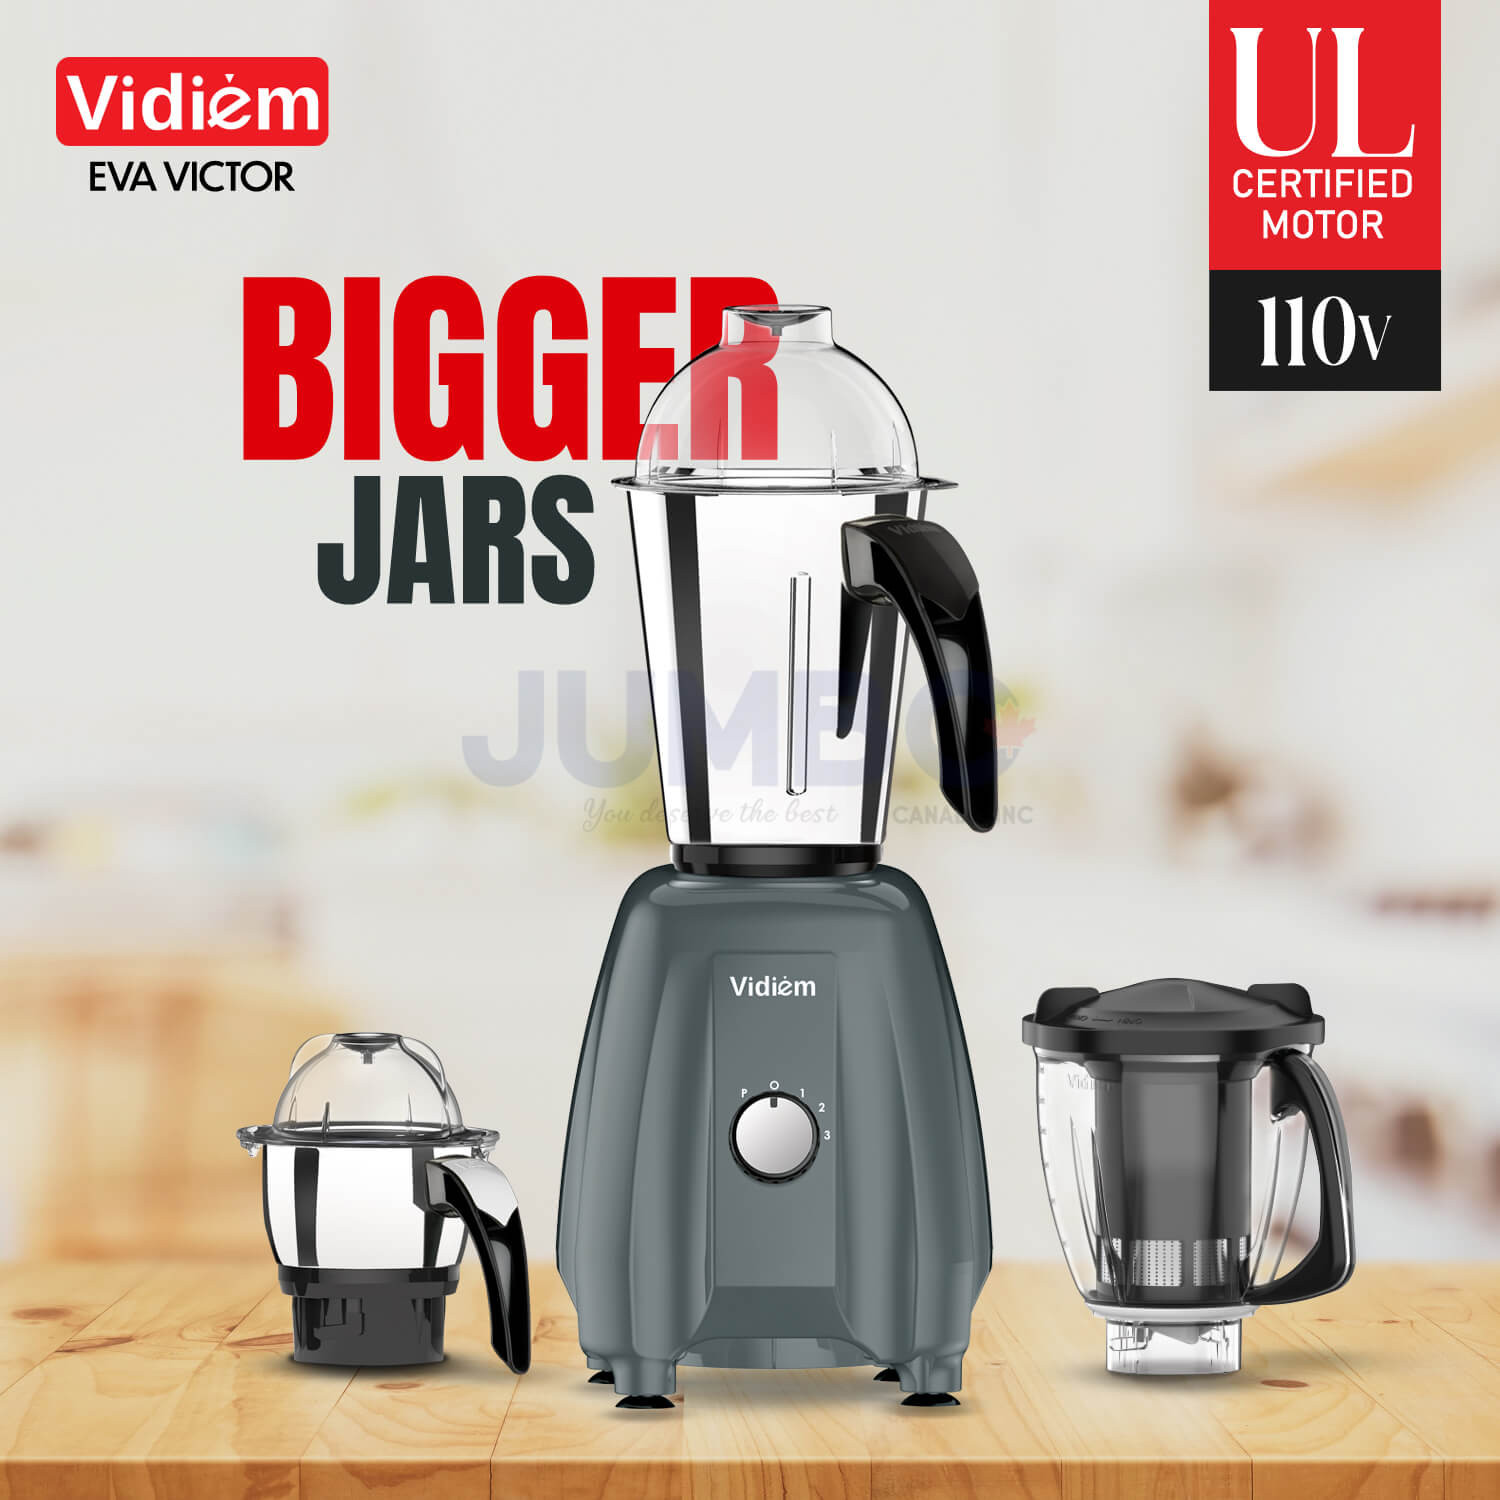 vidiem-eva-victor-650w-110v-stainless-steel-jars-indian-mixer-grinder-spice-coffee-grinder-with-almond-nut-milk-juice-extractor-for-use-in-canada-usa7